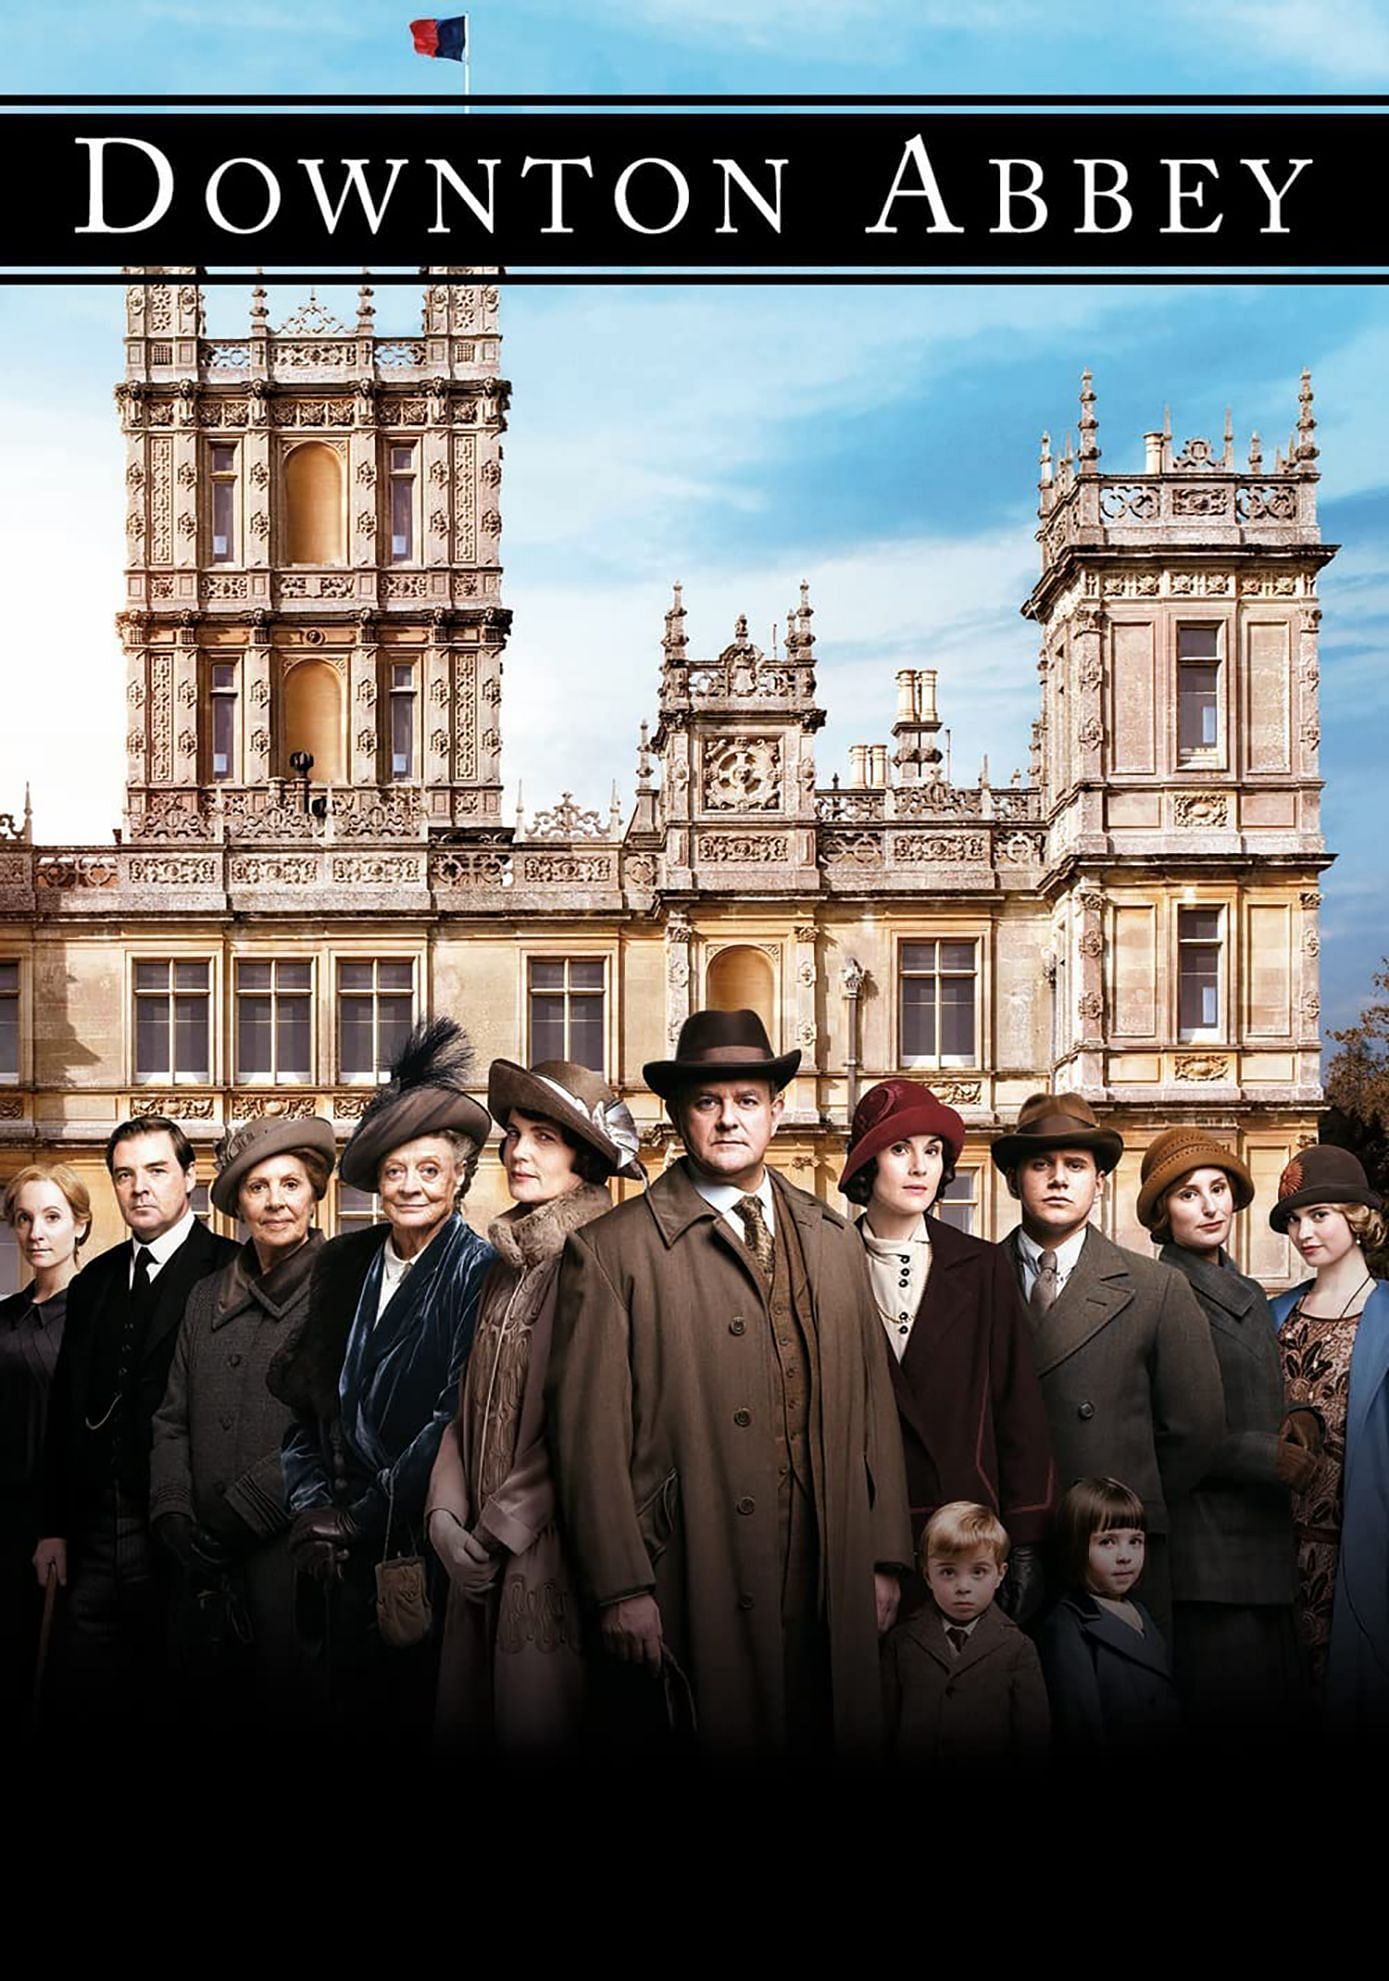 Downton Abbey by Carnival Productions (Image via ITV)